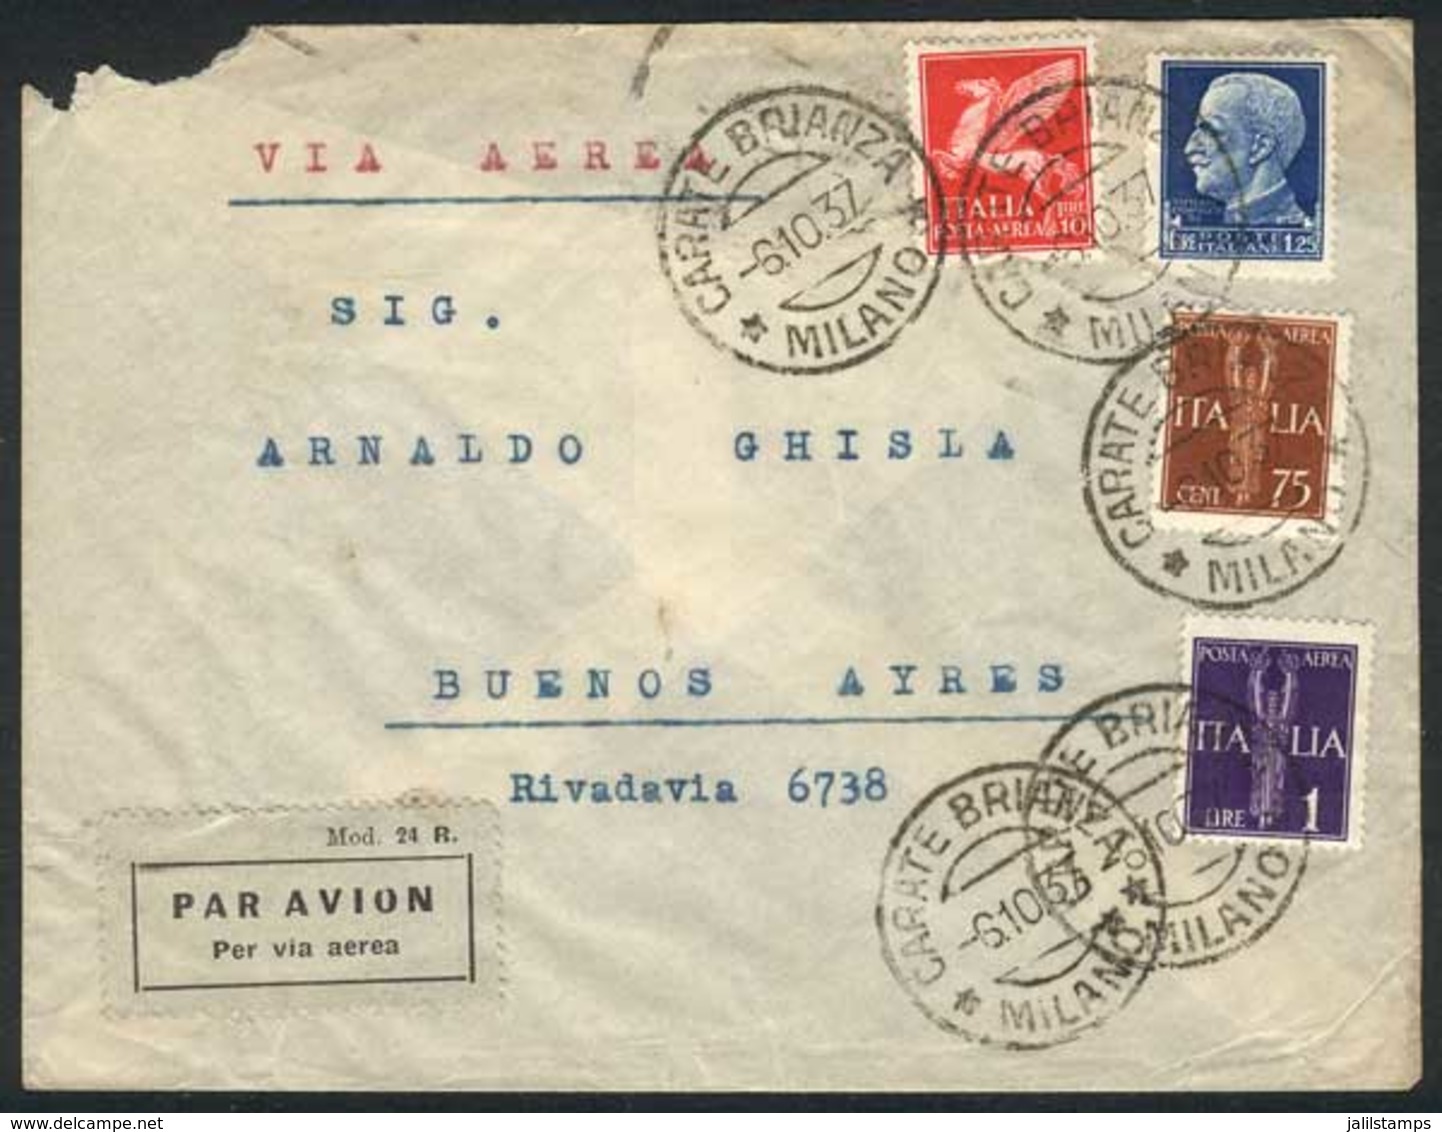 ITALY: Airmail Cover Sent From Carate Brianza To Buenos Aires On 6/OC/1937, Franked With Interesting 13 Lire Postage, Ve - Unclassified